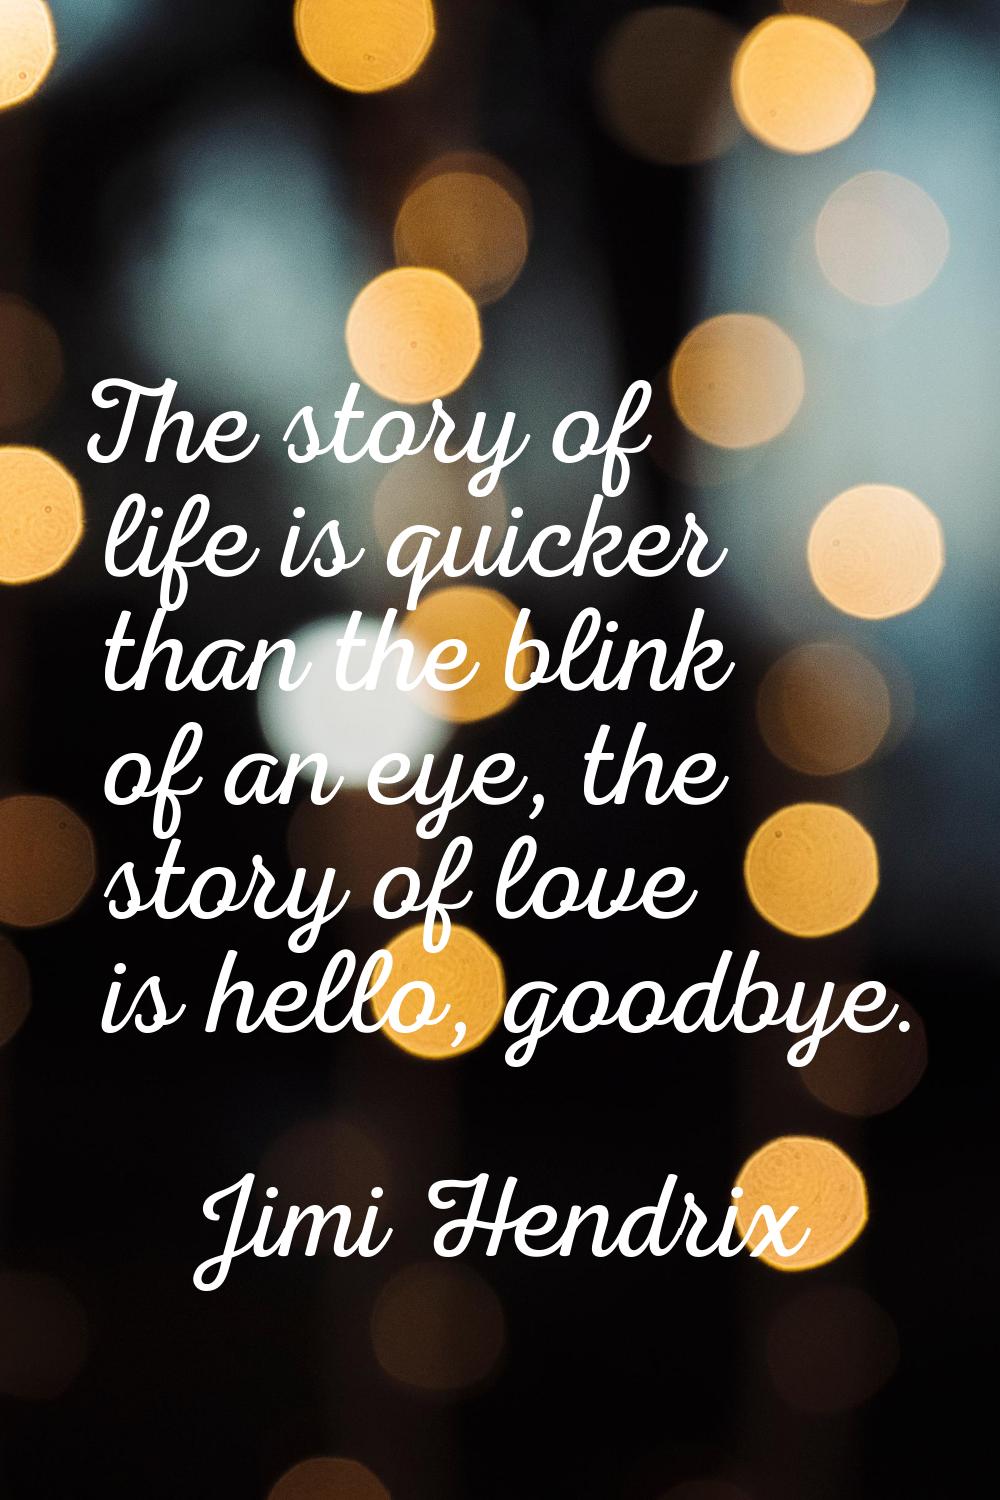 The story of life is quicker than the blink of an eye, the story of love is hello, goodbye.